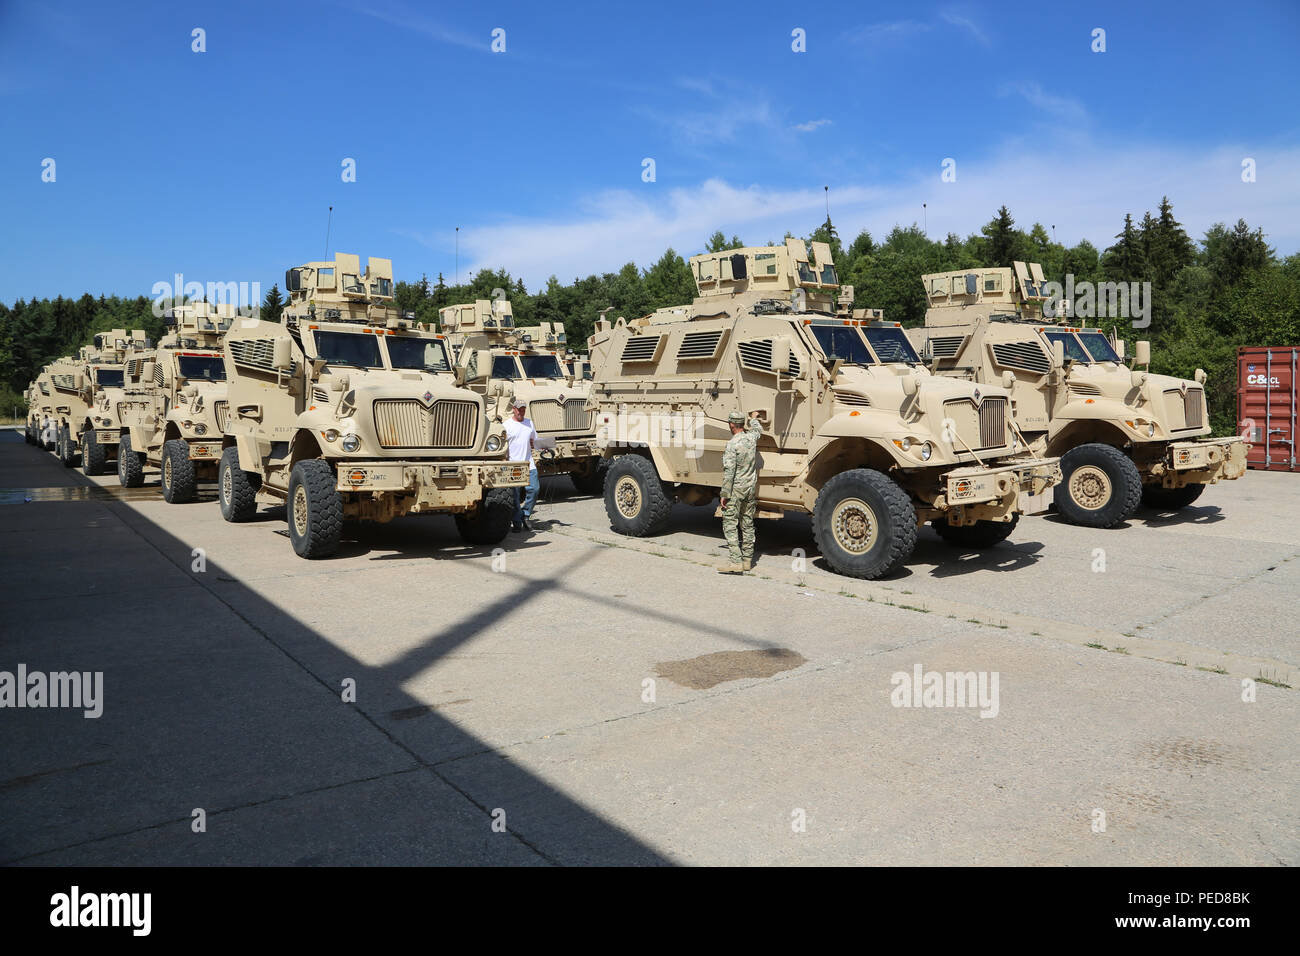 Multi Integrated Laser Engagement System (MILES) specialists inventory MaxxPro Mine-Resistant, Ambush Protected Vehicles during a mission rehearsal exercise (MRE) at the Joint Multinational Readiness Center in Hohenfels, Germany, Aug. 4, 2015.  Georgian soldiers conduct the MRE alongside U.S. Marine Corps mentors before deploying to Afghanistan in order to hone the skills necessary to operate alongside International Security Assistance Force partner forces in a counterinsurgency environment. (U.S. Army photo by Spc. Tyler Kingsbury/Released) Stock Photo